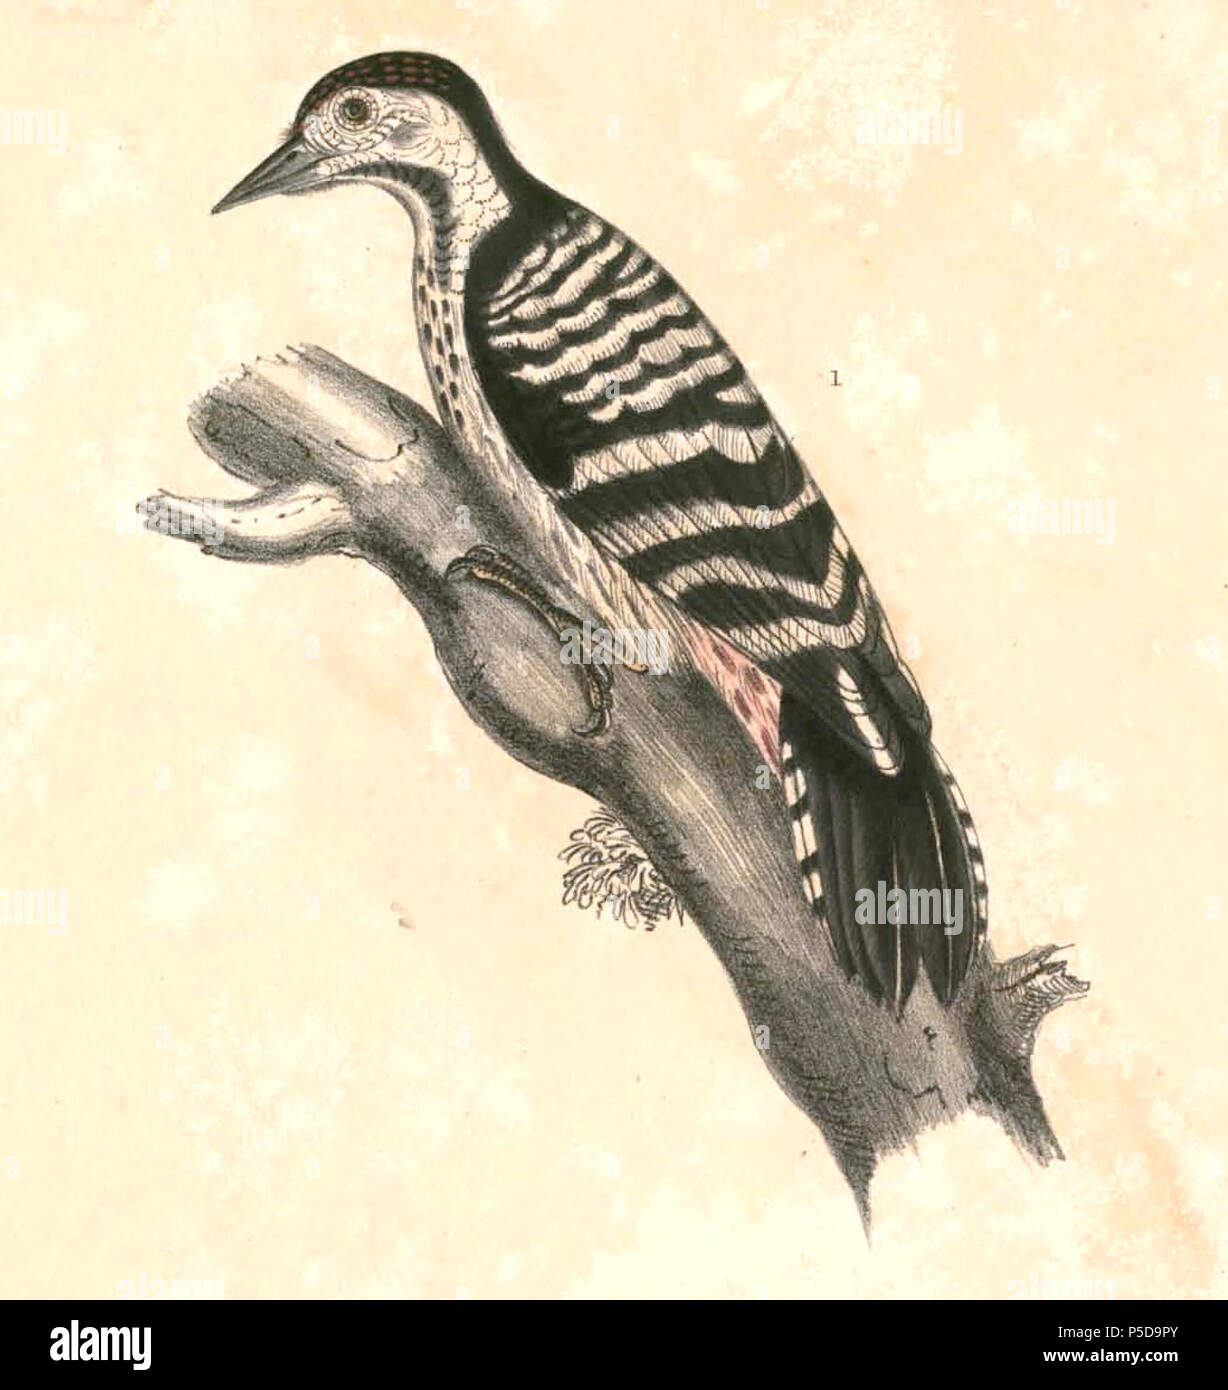 N/A.  English: « Picus macei » = Dendrocopos macei (Fulvous-breasted Woodpecker) - male Français: « Picus macei » = Dendrocopos macei (Pic de Macé) - mâle . between 1830 and 1832.   Thomas Hardwicke  (1755–1835)     Alternative names Hardw.  Description English soldier and naturalist  Date of birth/death 1755 3 May 1835  Location of birth/death London Borough of Lambeth  Authority control  : Q2543258 VIAF:308180676 ISNI:0000 0004 3350 0810 LCCN:nb2013018703 Botanist:Hardw. SUDOC:183009134 WorldCat 435 Dendrocopos macei Hardwicke - male Stock Photo